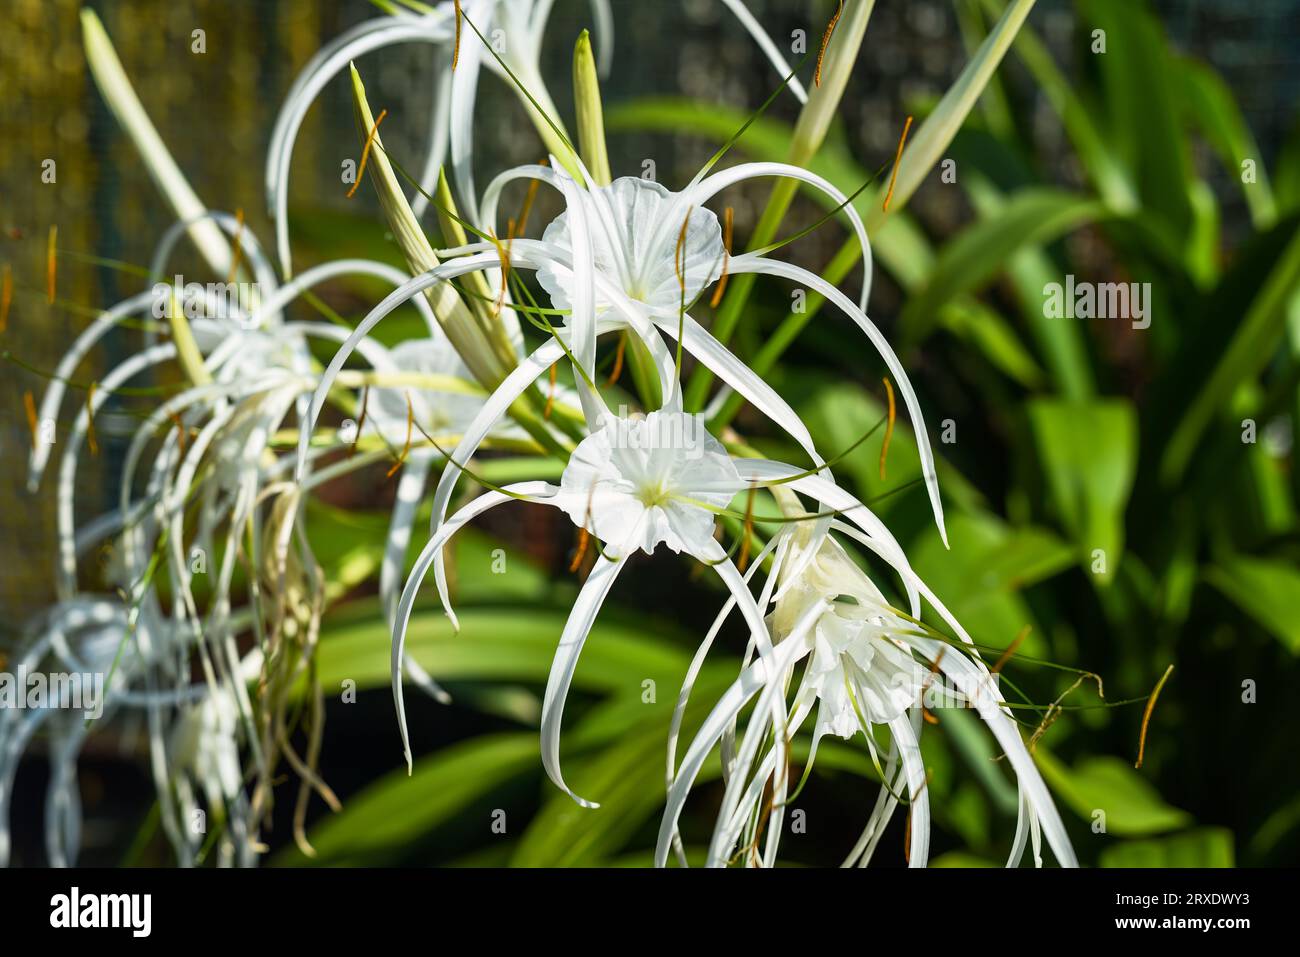 Hymenocallis littoralis or the beach spider lily growing in Malaysia Stock Photo